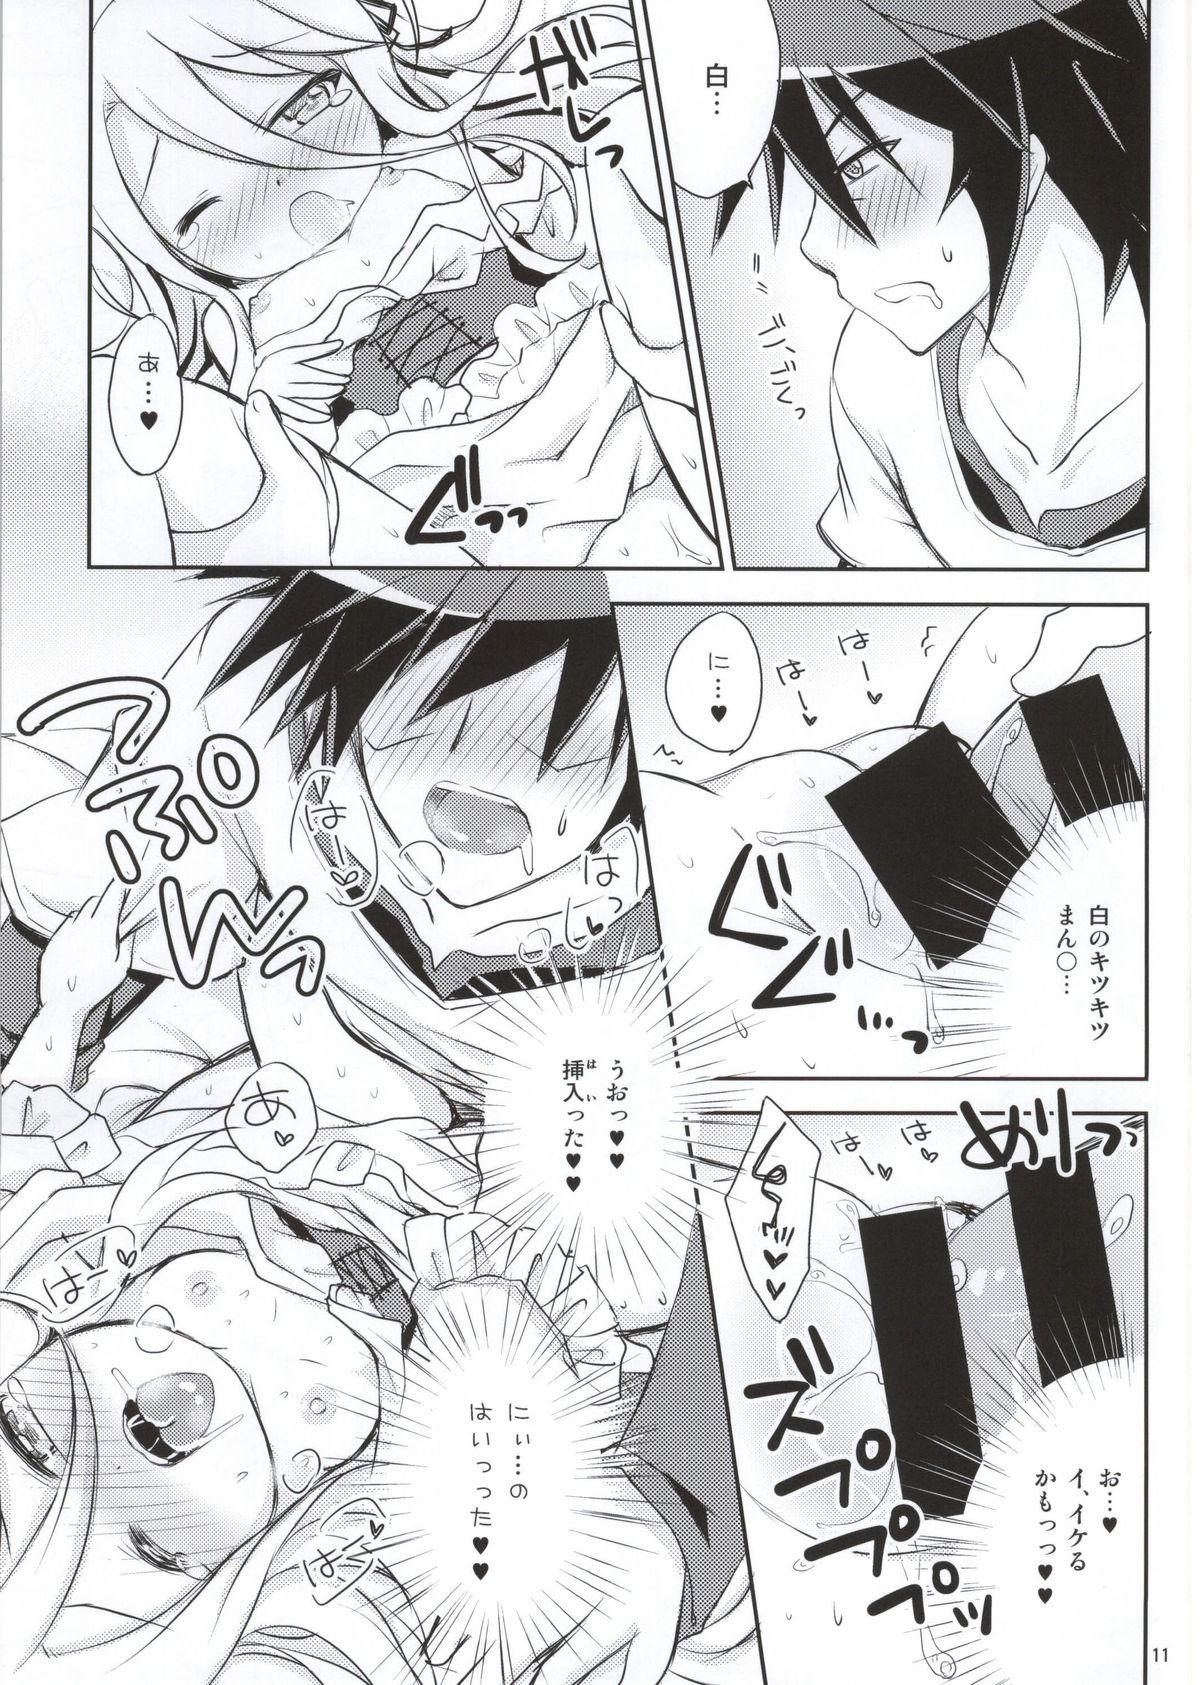 Relax Nii, Osotte? - No game no life Rope - Page 8